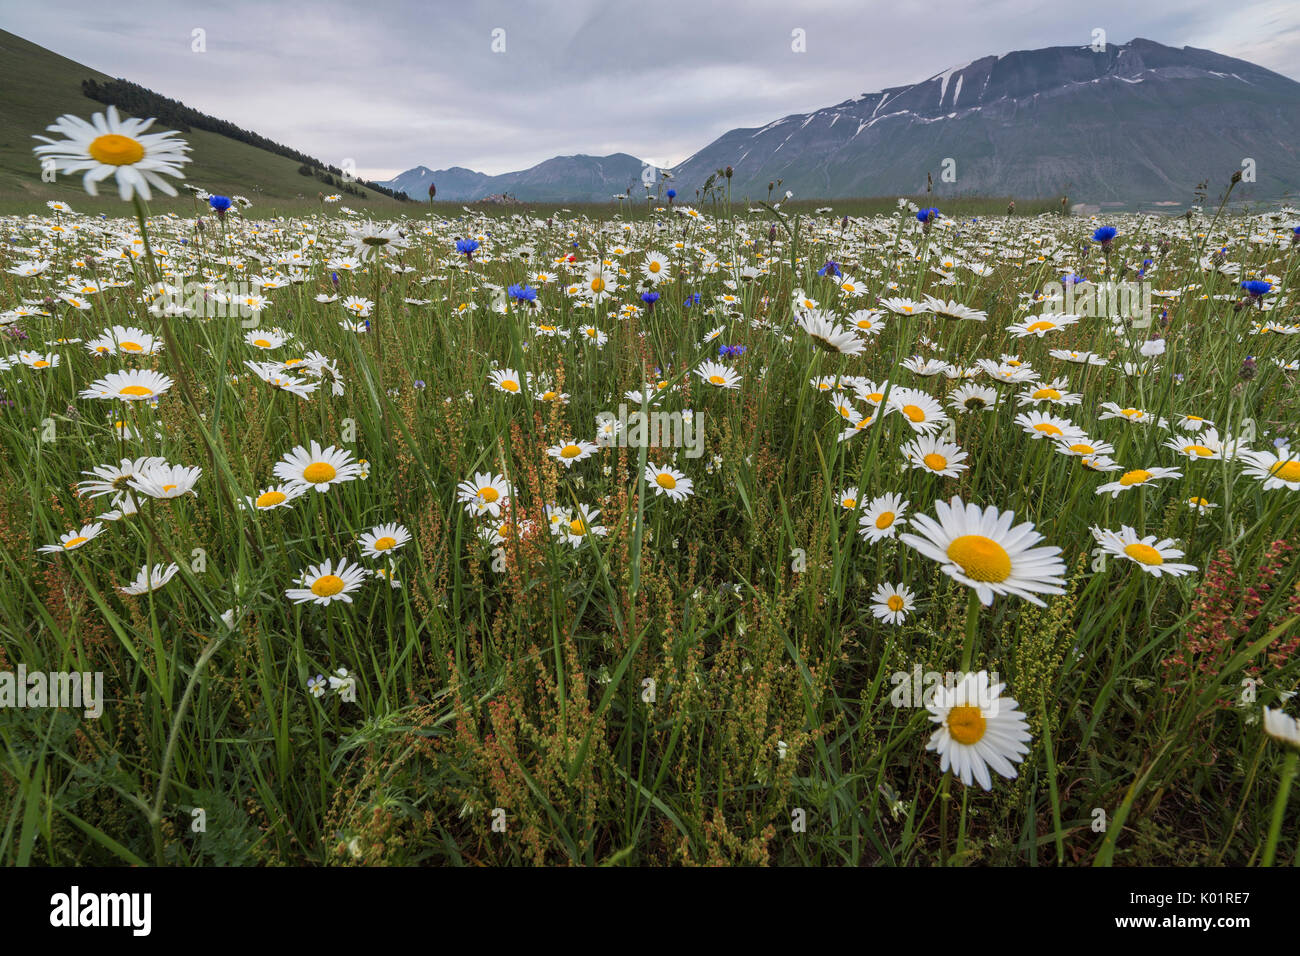 Colorful flowers in bloom frame the mountains Castelluccio di Norcia Province of Perugia Umbria Italy Europe Stock Photo